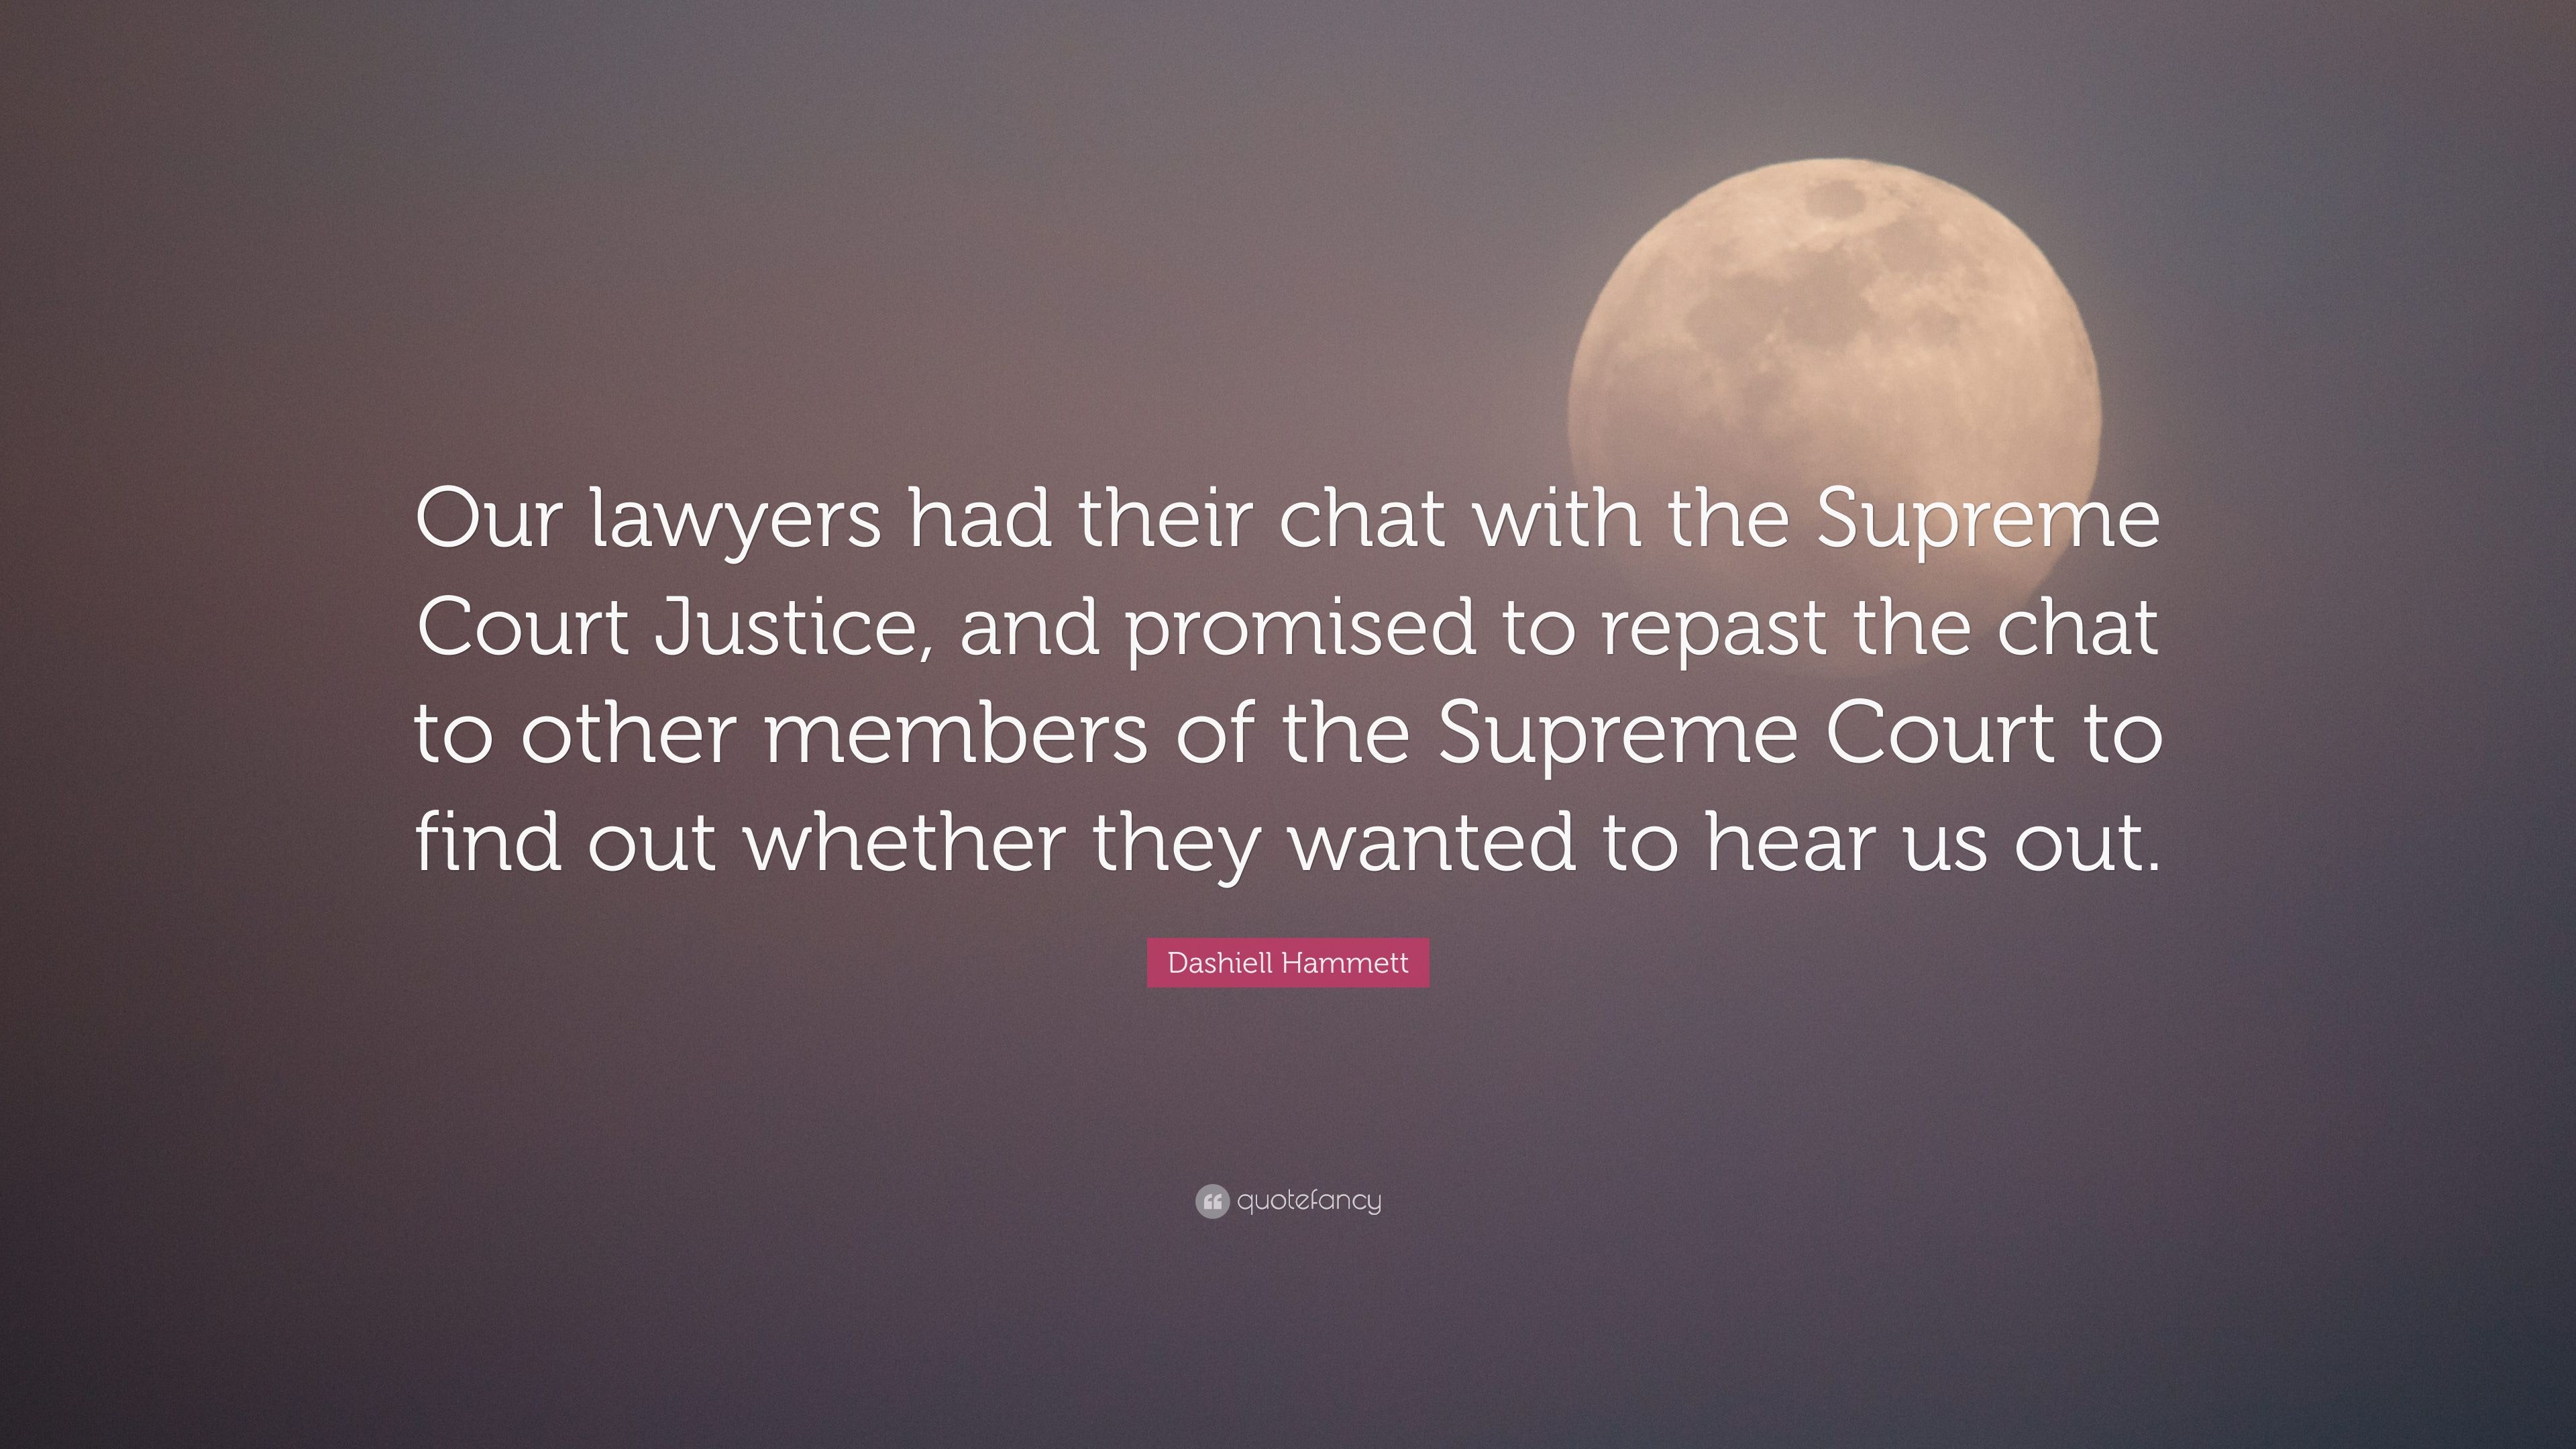 Dashiell Hammett Quote: “Our lawyers had their chat with